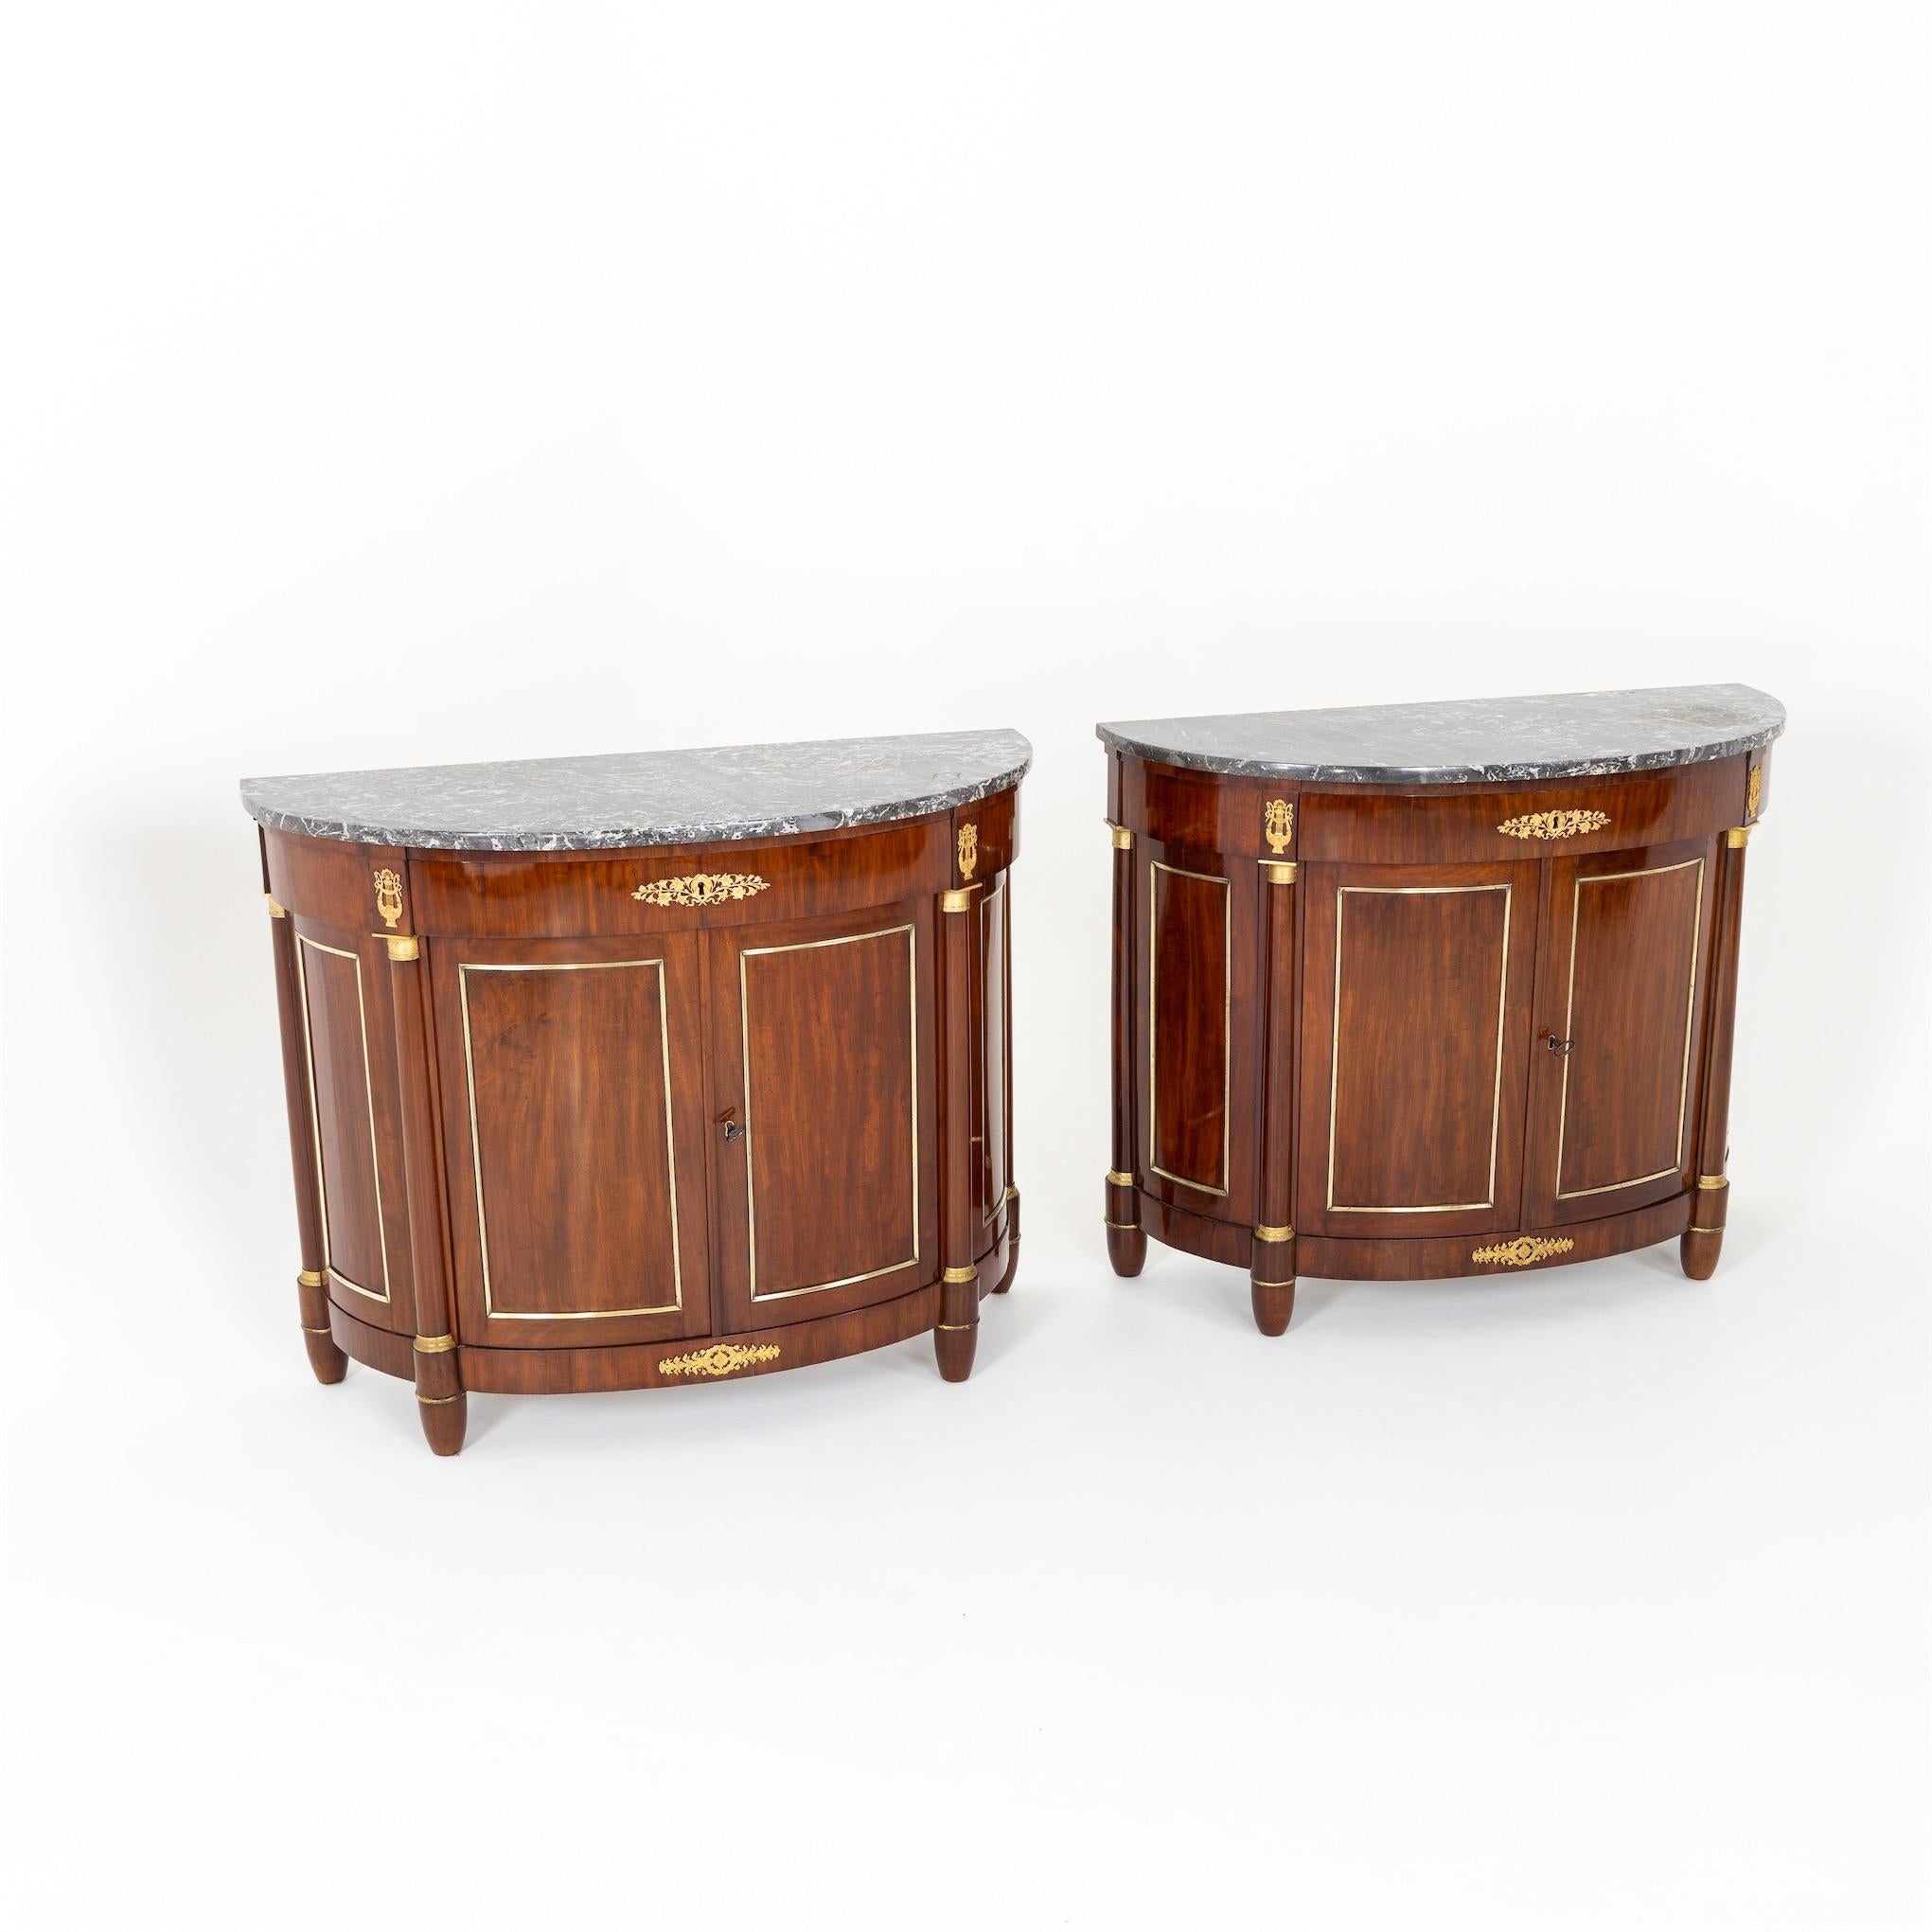 French Empire Demi Lune Sideboards, France, c. 1810